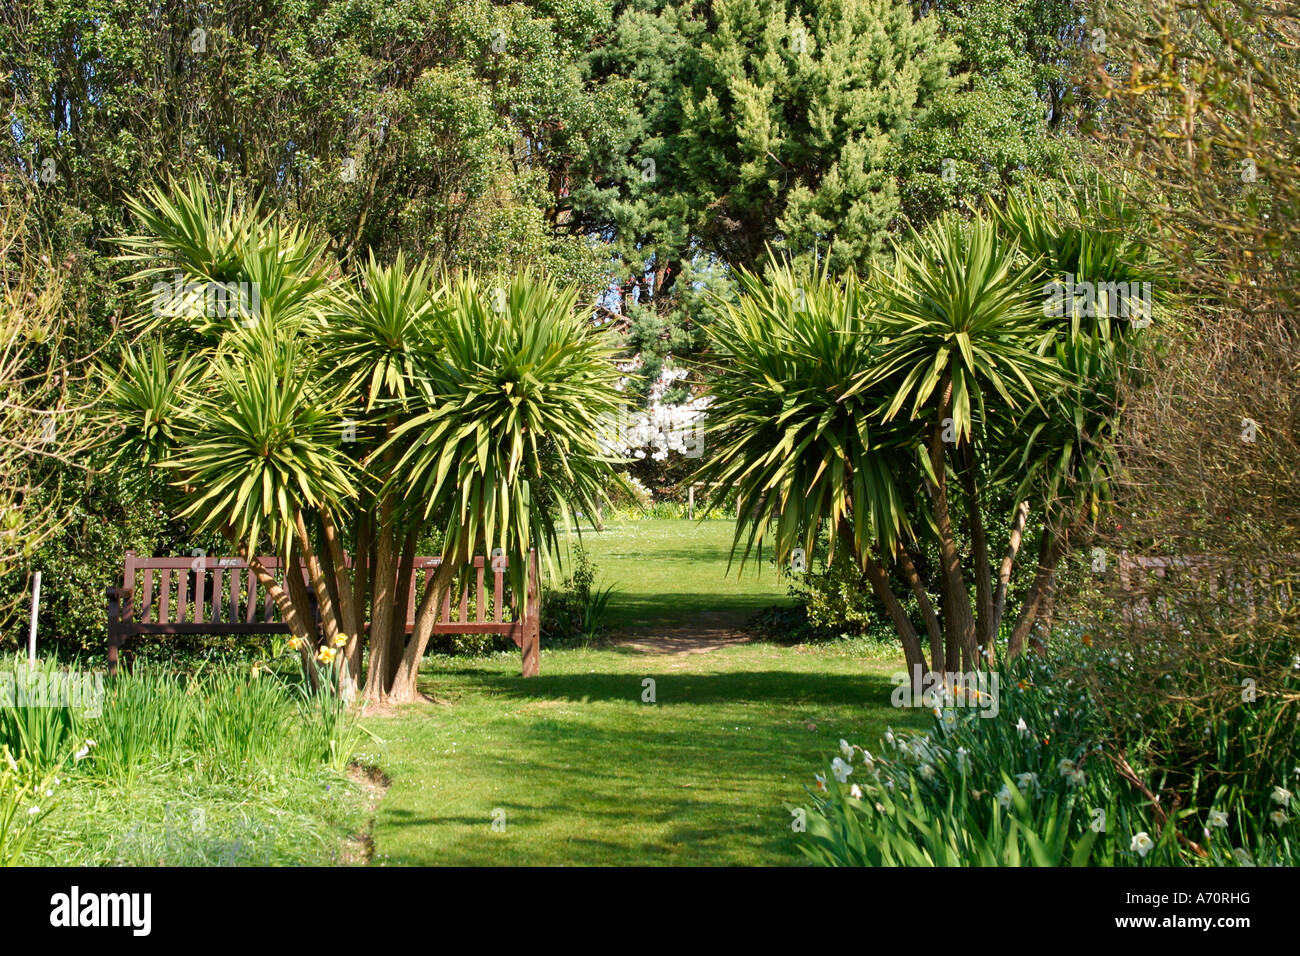 Pair of cordylines (Cordyline australis) framing grassy entrance to secret garden within Highdown Gardens, near Worthing, West Sussex, England, UK Stock Photo